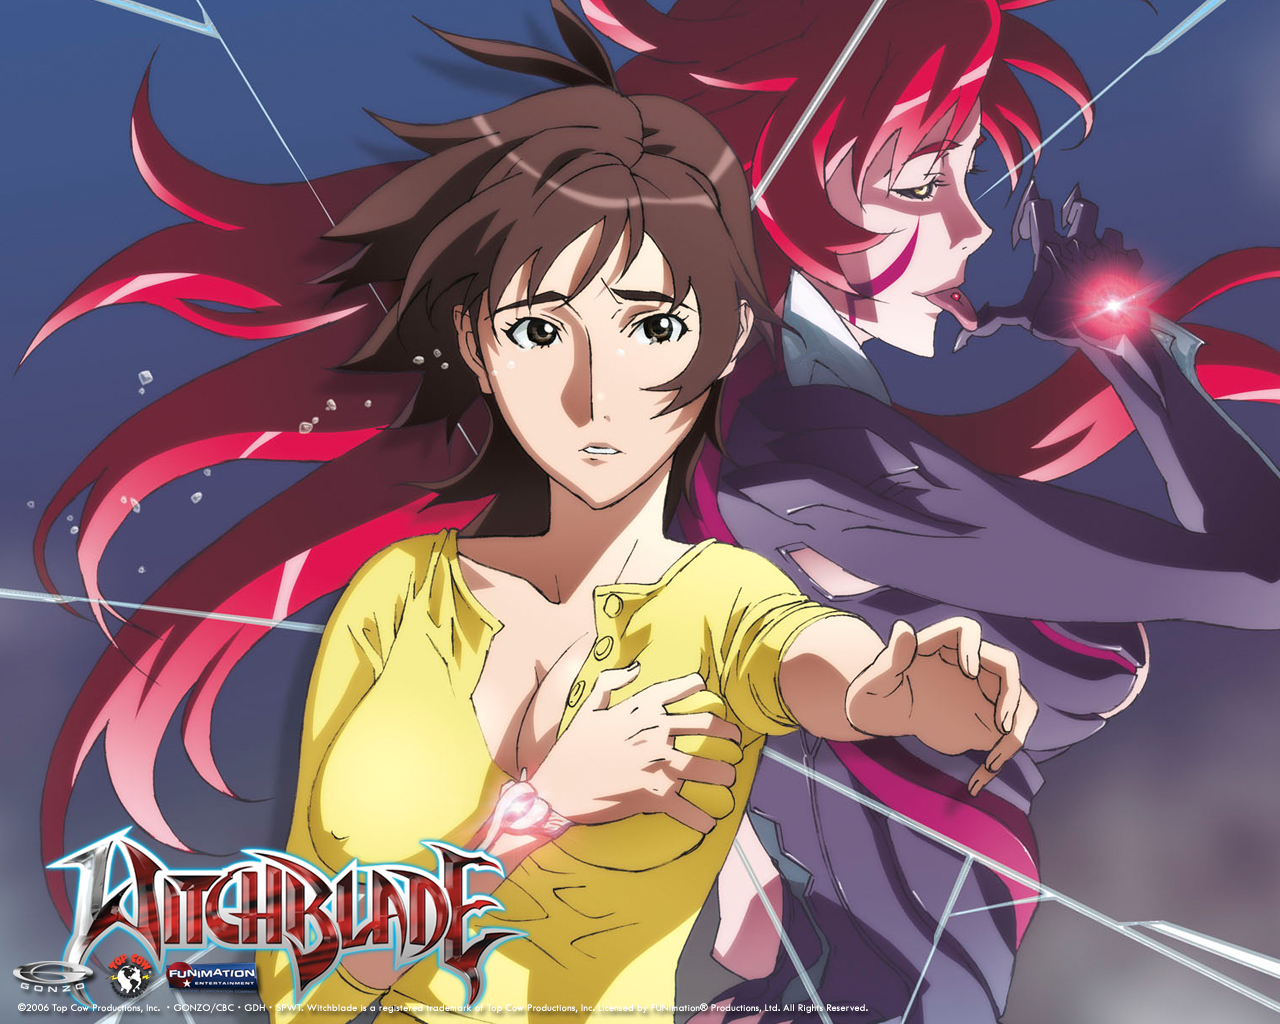 Witchblade Anime Wallpaper 1280x1024 Witchblade Anime 1280x1024